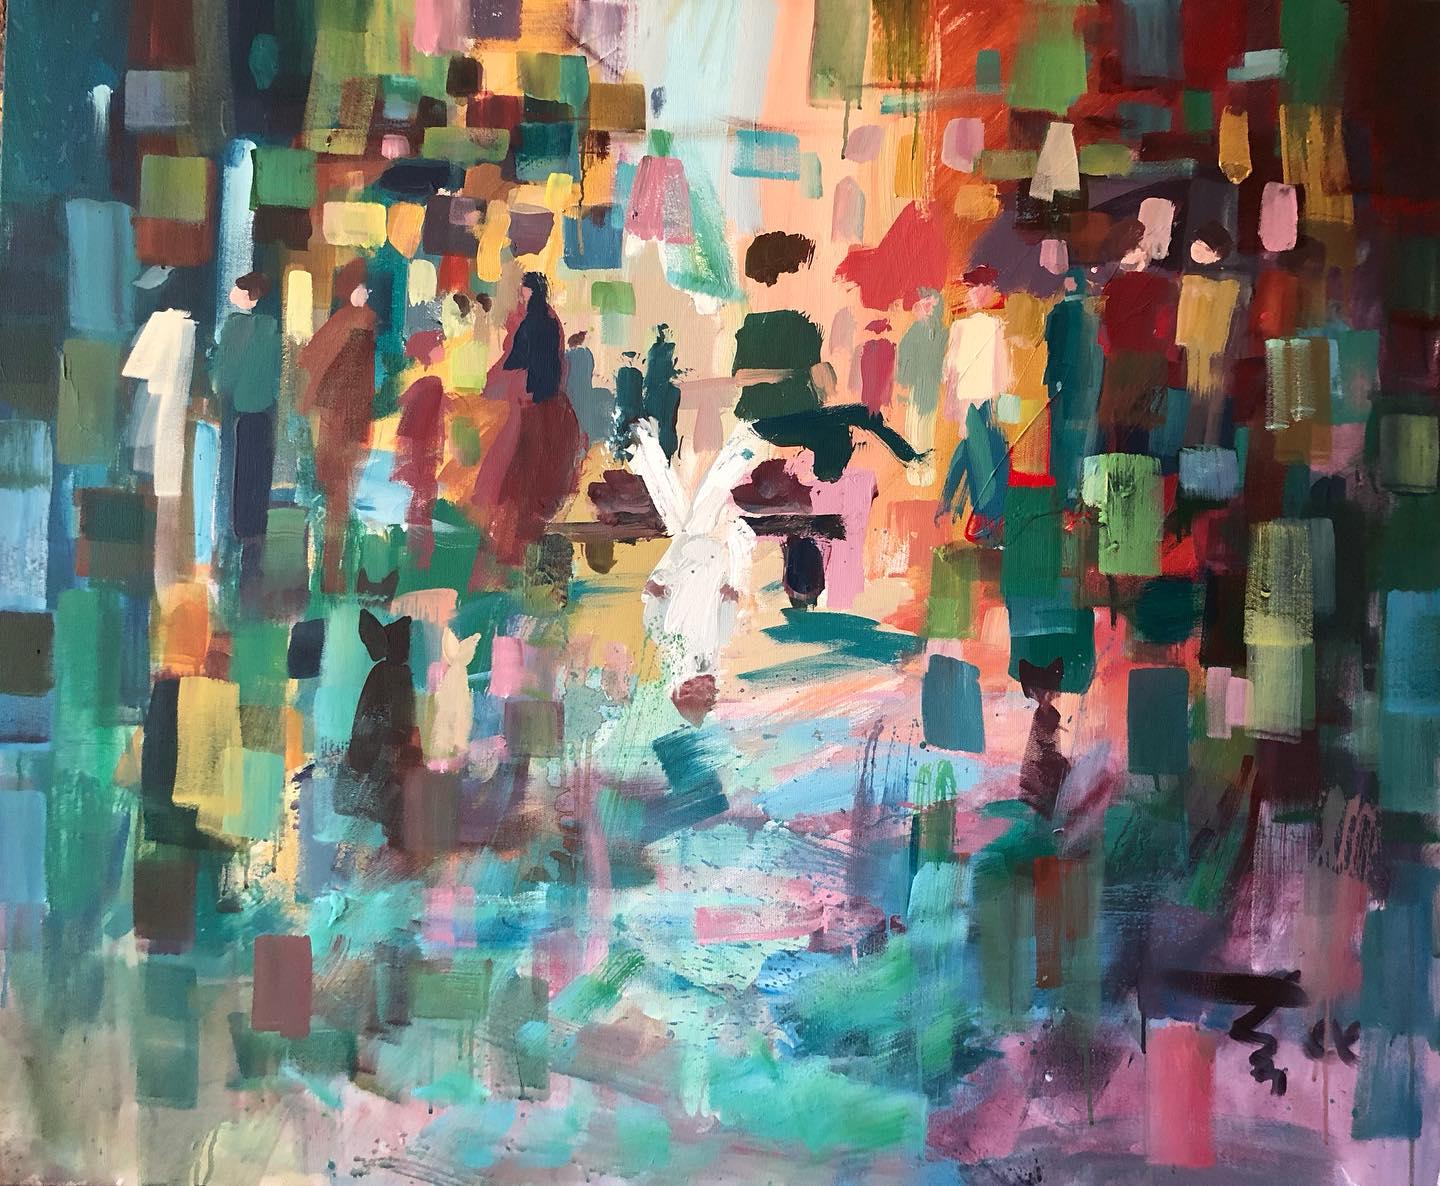 "A Walk of Life 2" Abstract Painting 39" x 47" inch by Ahmed Dafrawy 

Dafrawy’s fine arts academic background started in 2014 when he received the certificate of drawing course completion from the Faculty of Art & Education located in Zamalek